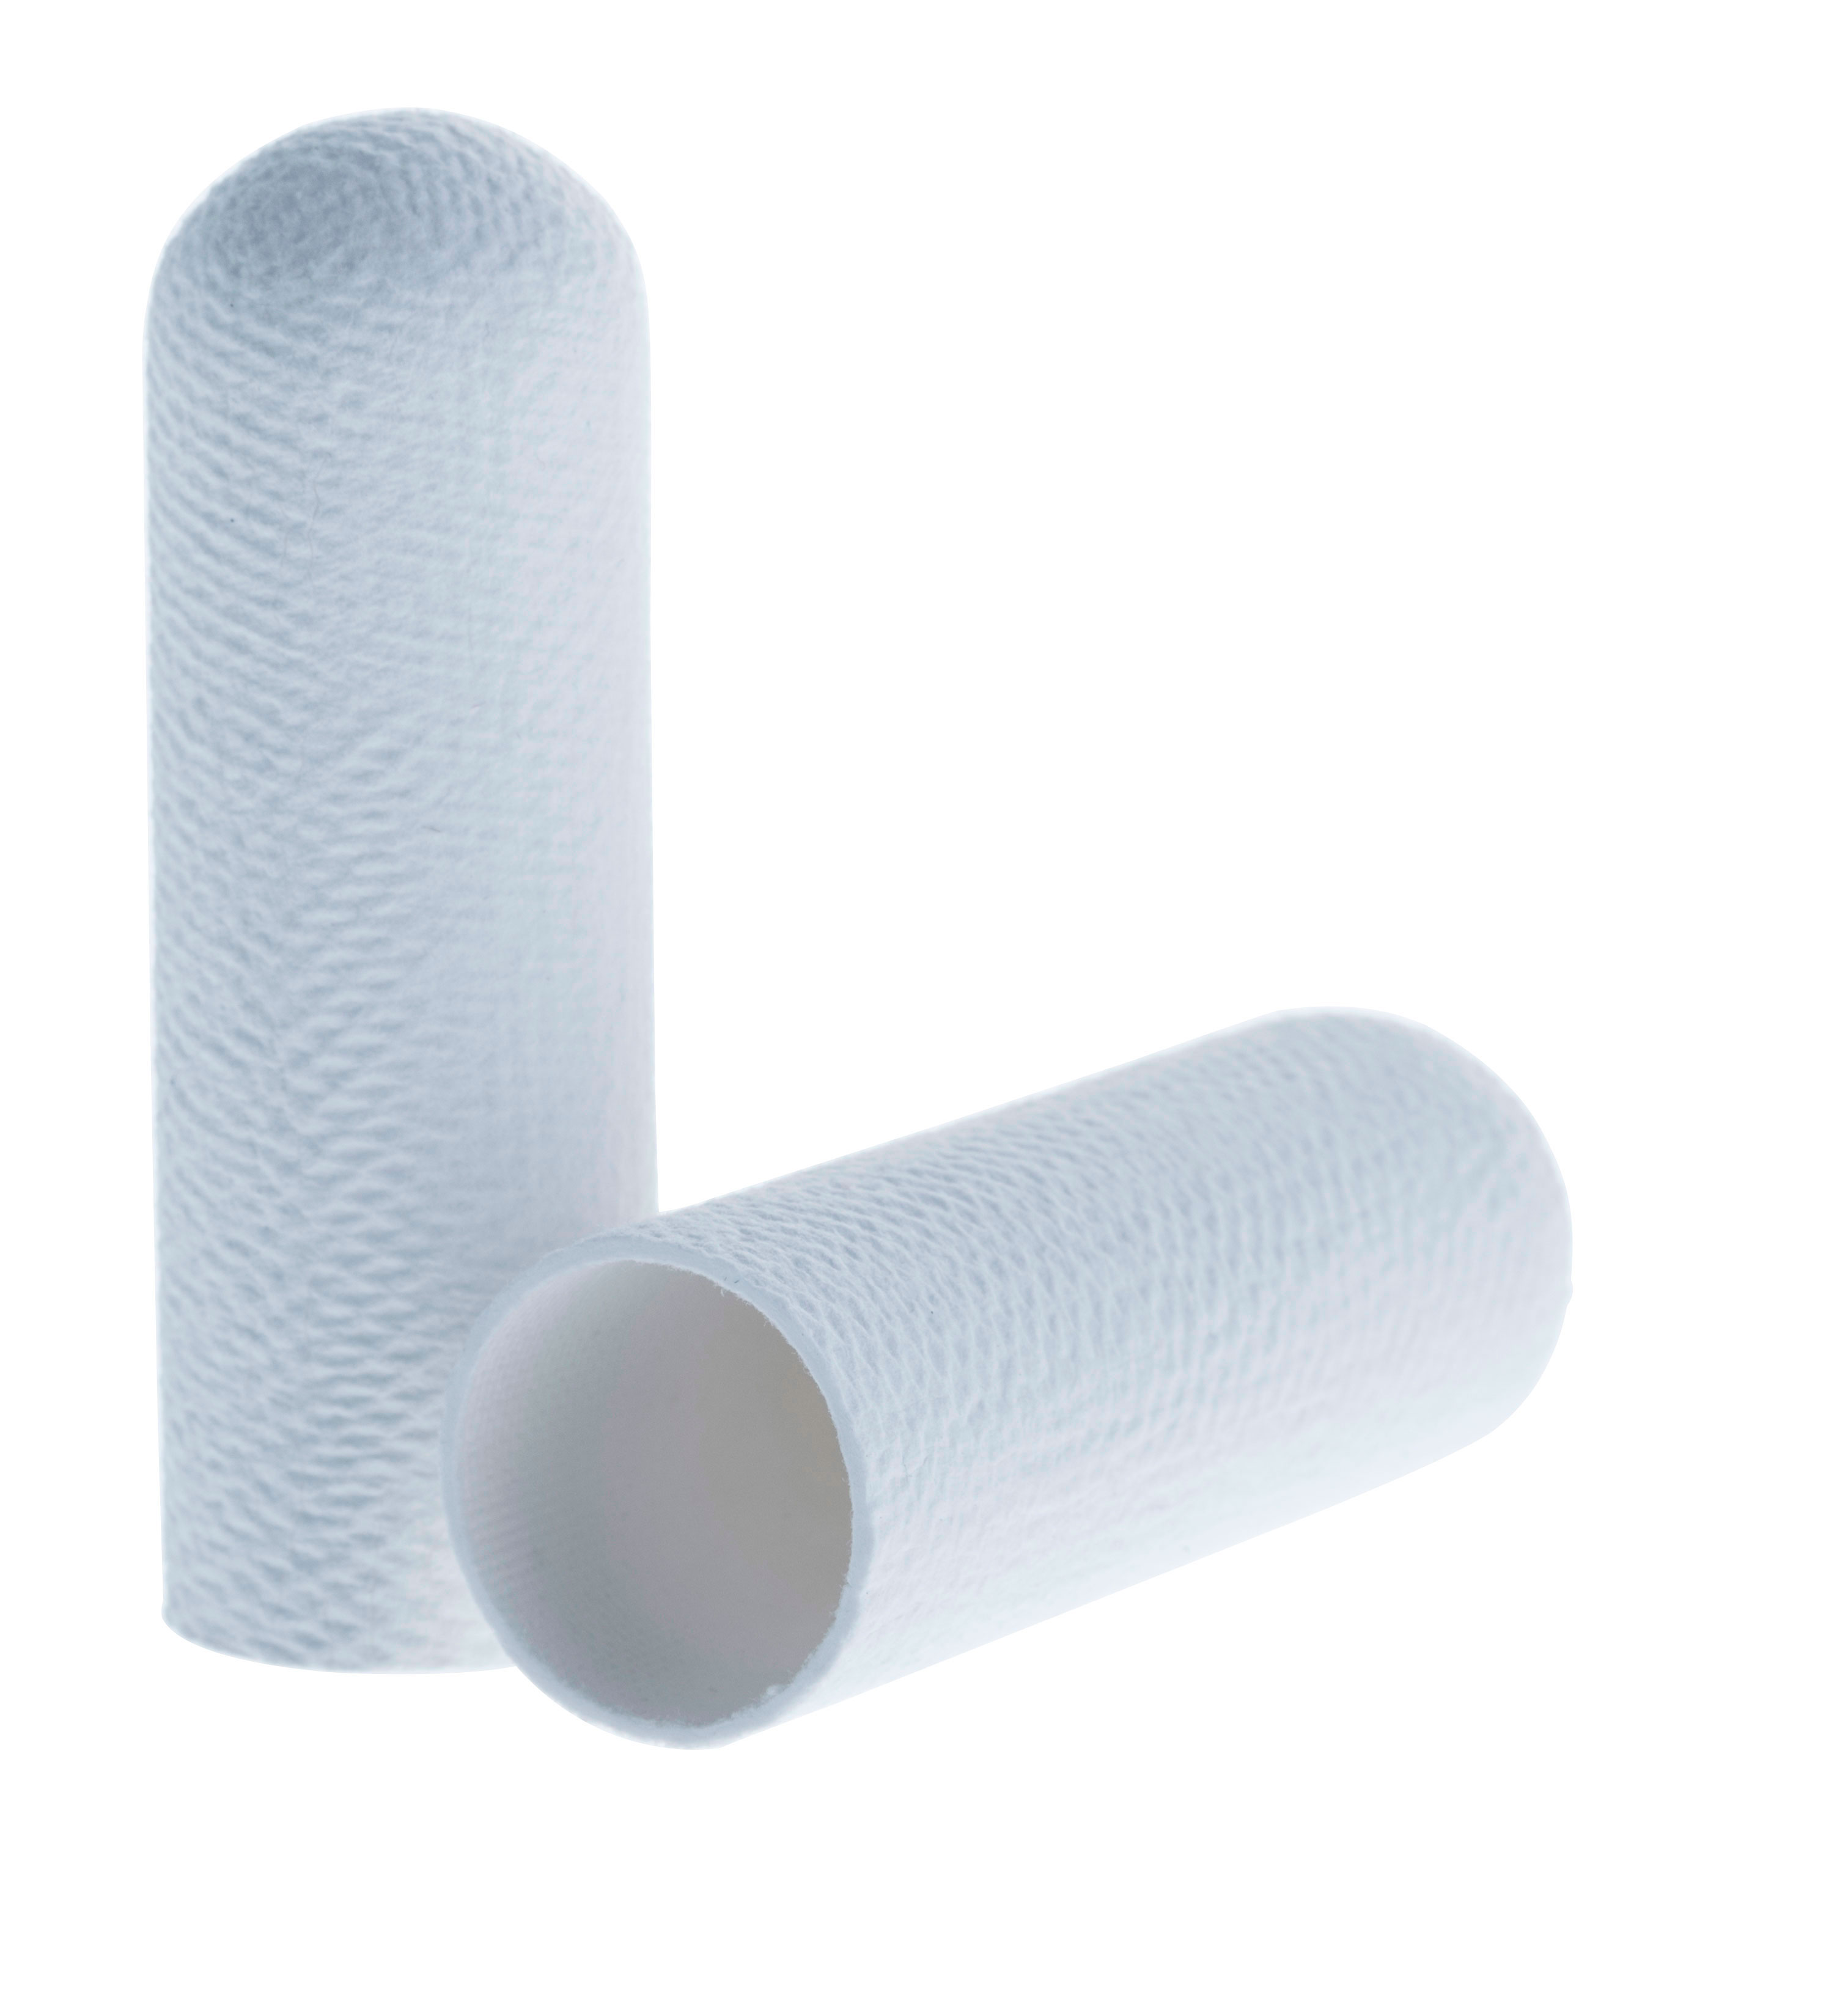 Cellulose extraction thimbles for Soxhlet extraction. SCHARLAU. Standard cellulose cartridge. Dim. Øxlength: 30x95mm. Particle retention in liquid: Nom. 8-15 microns